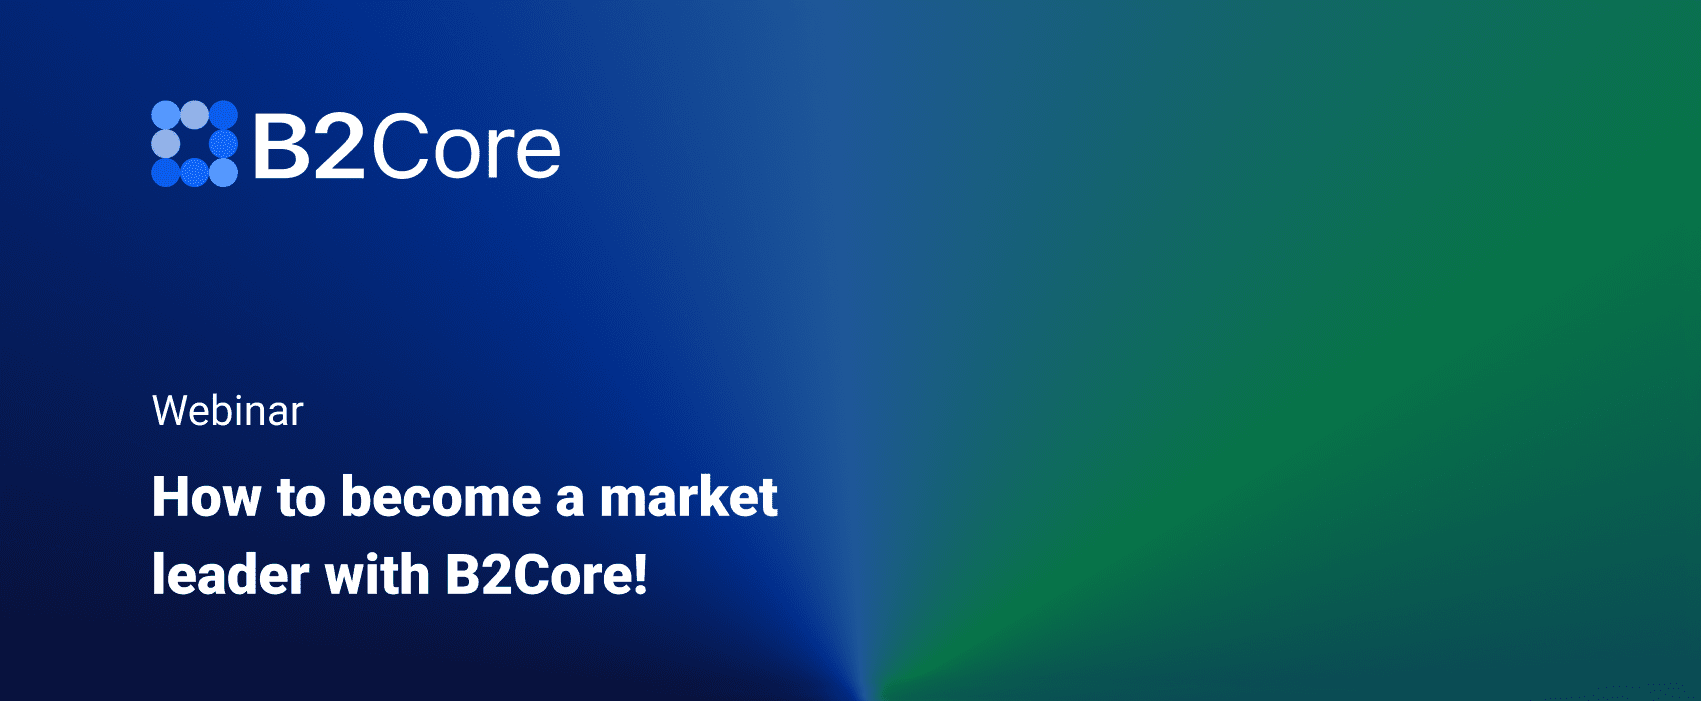 How to Become a Market Leader with B2Core!